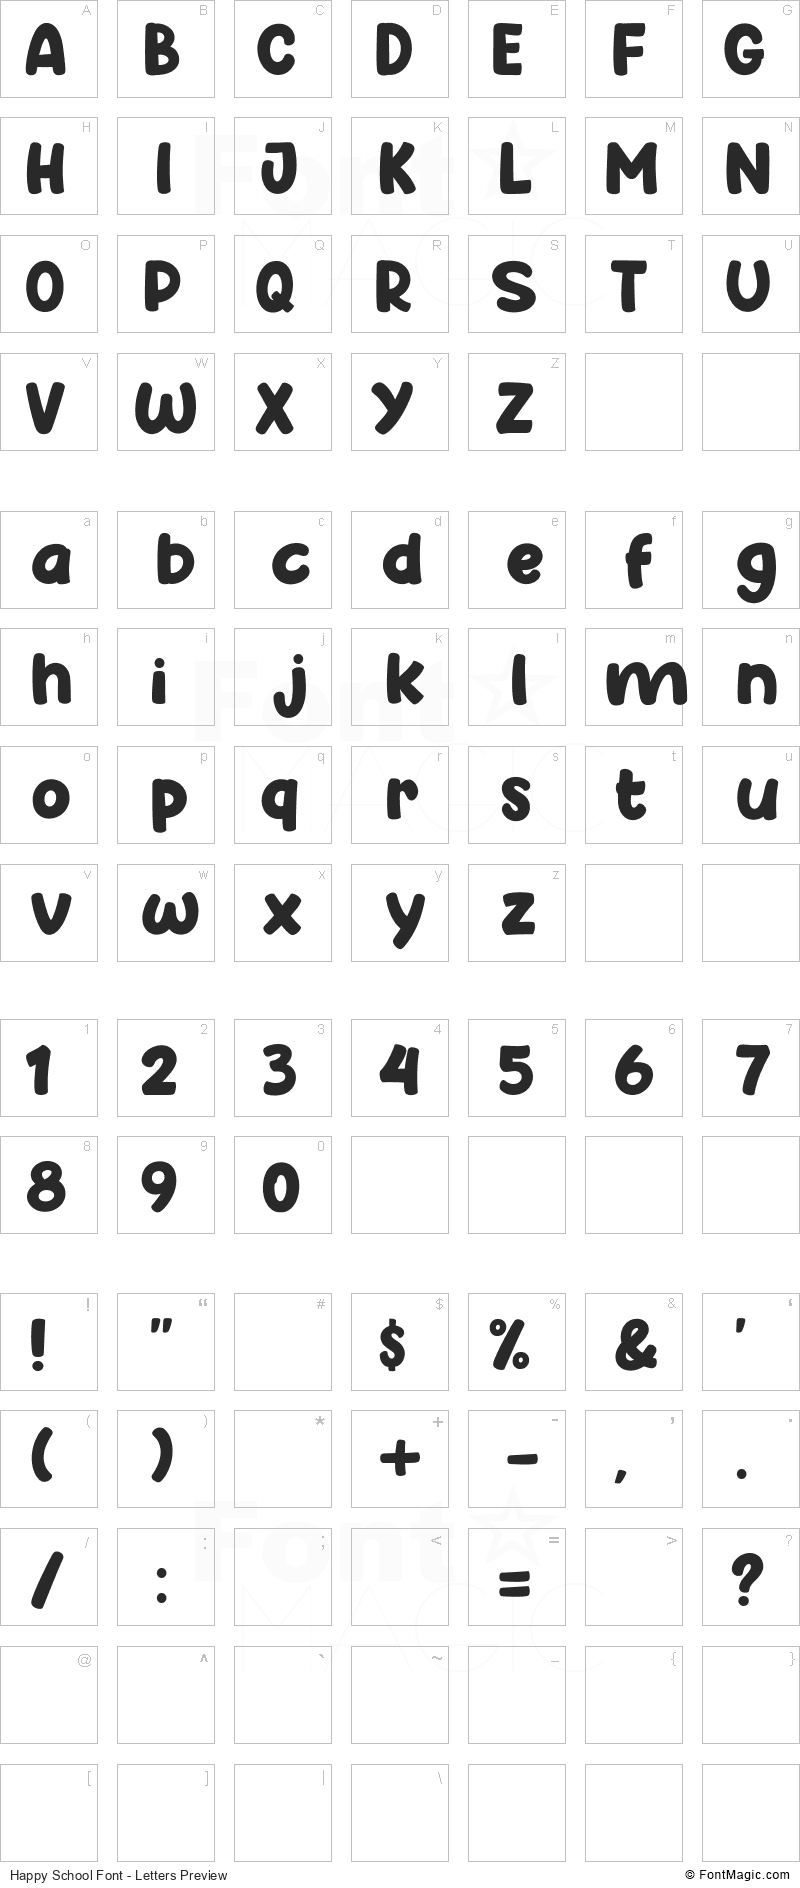 Happy School Font - All Latters Preview Chart